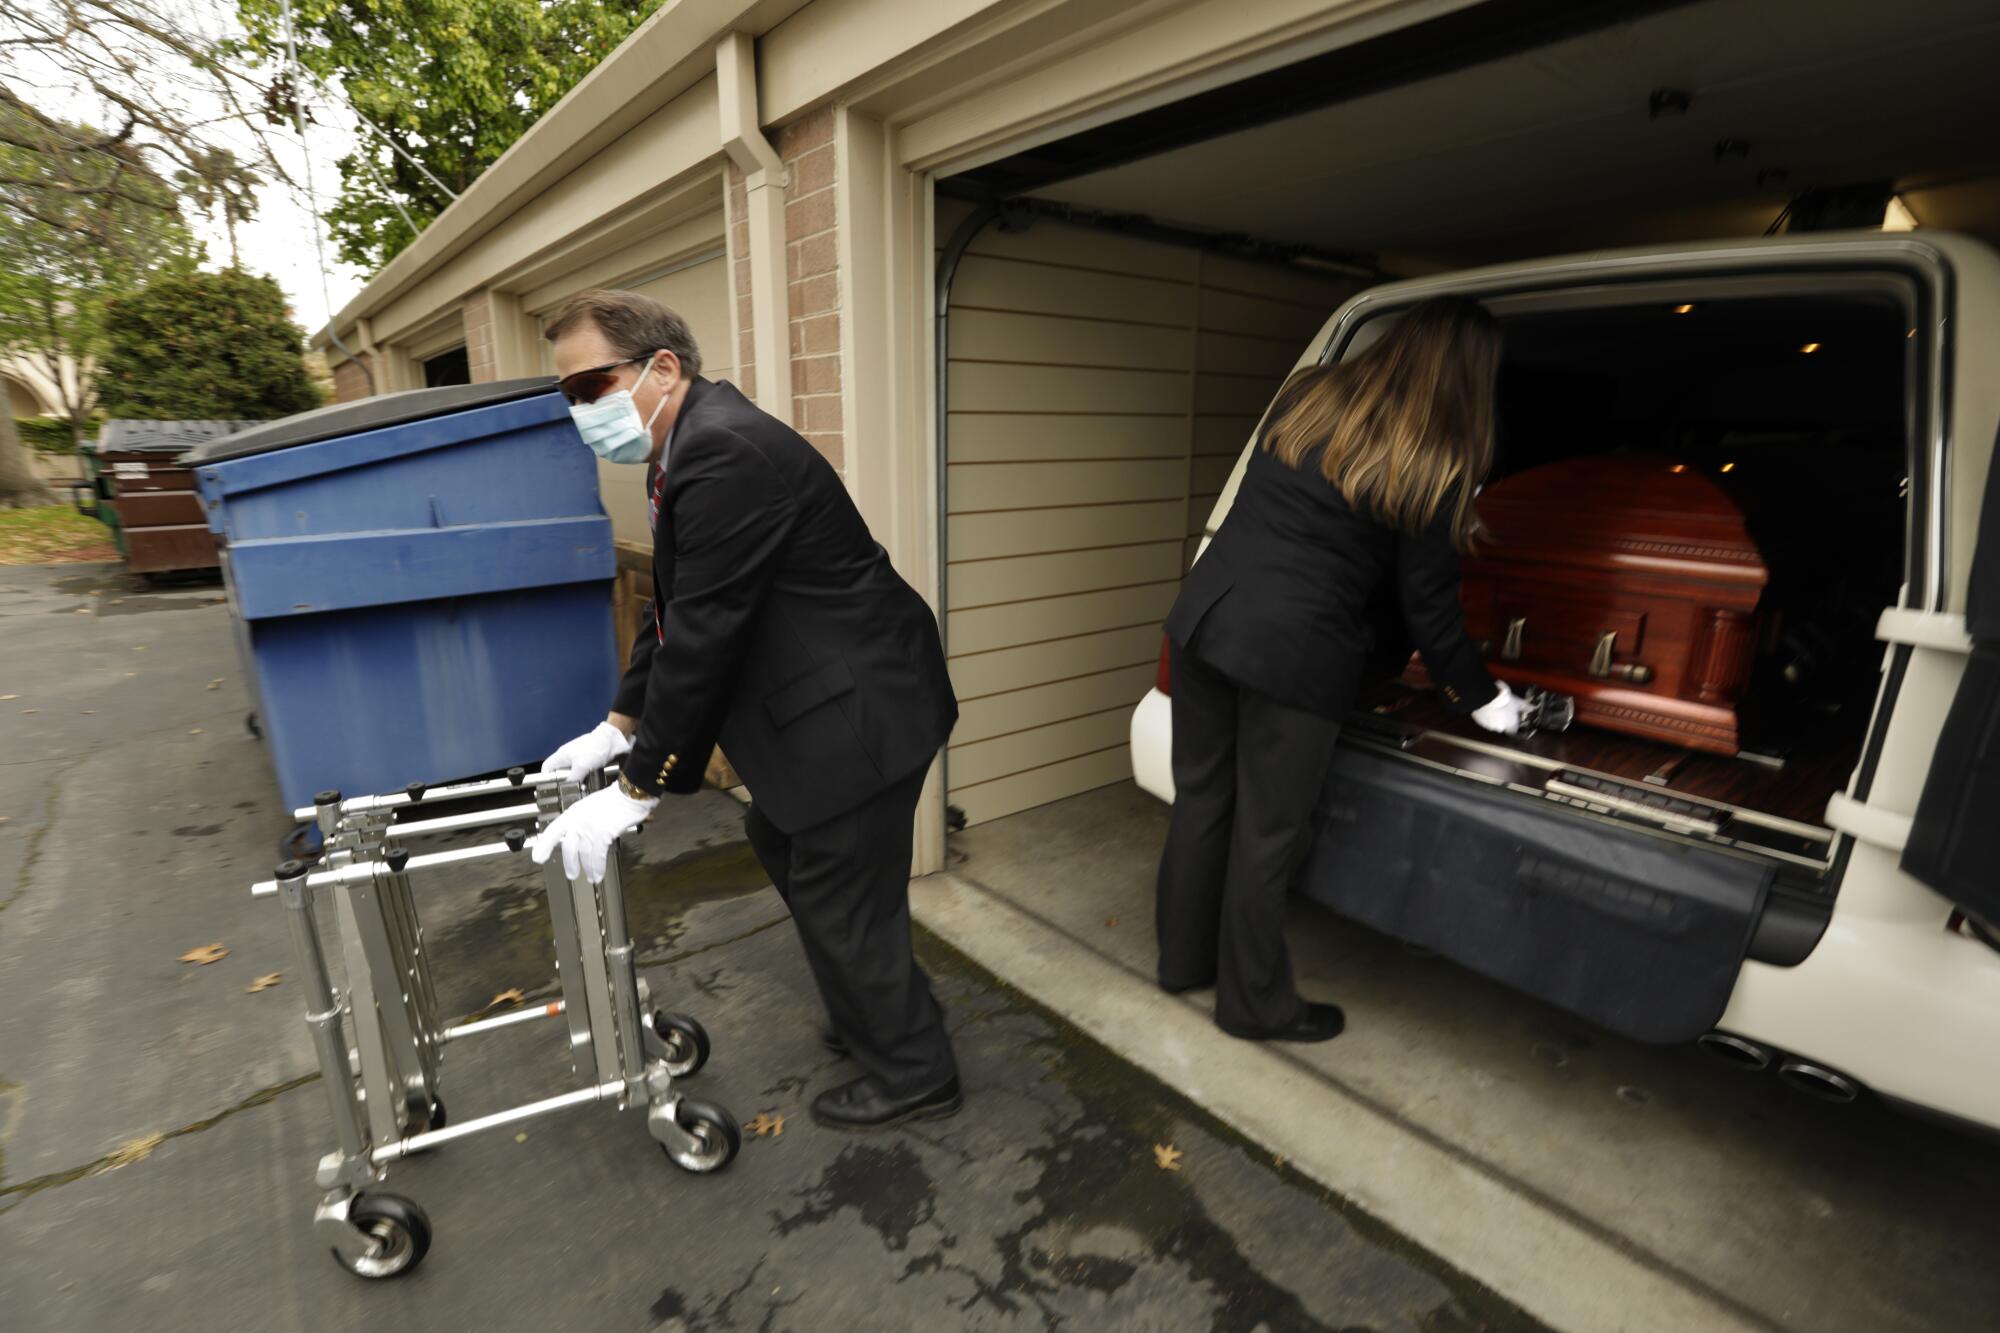 Funeral home workers followed strict protocols in handling the casket.